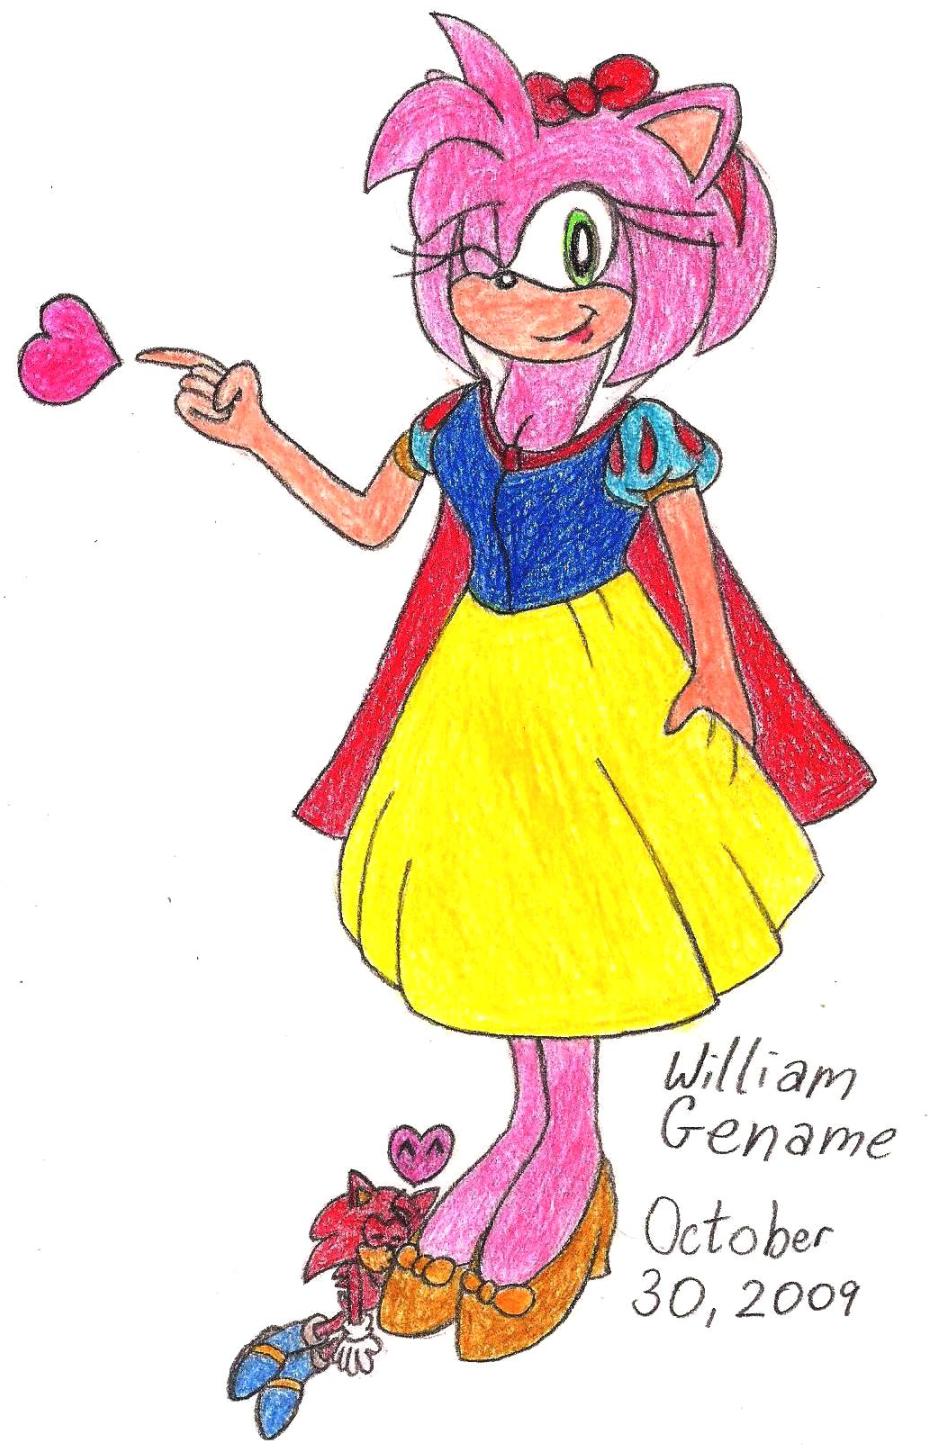 GTS Amy as Snow White by germanname